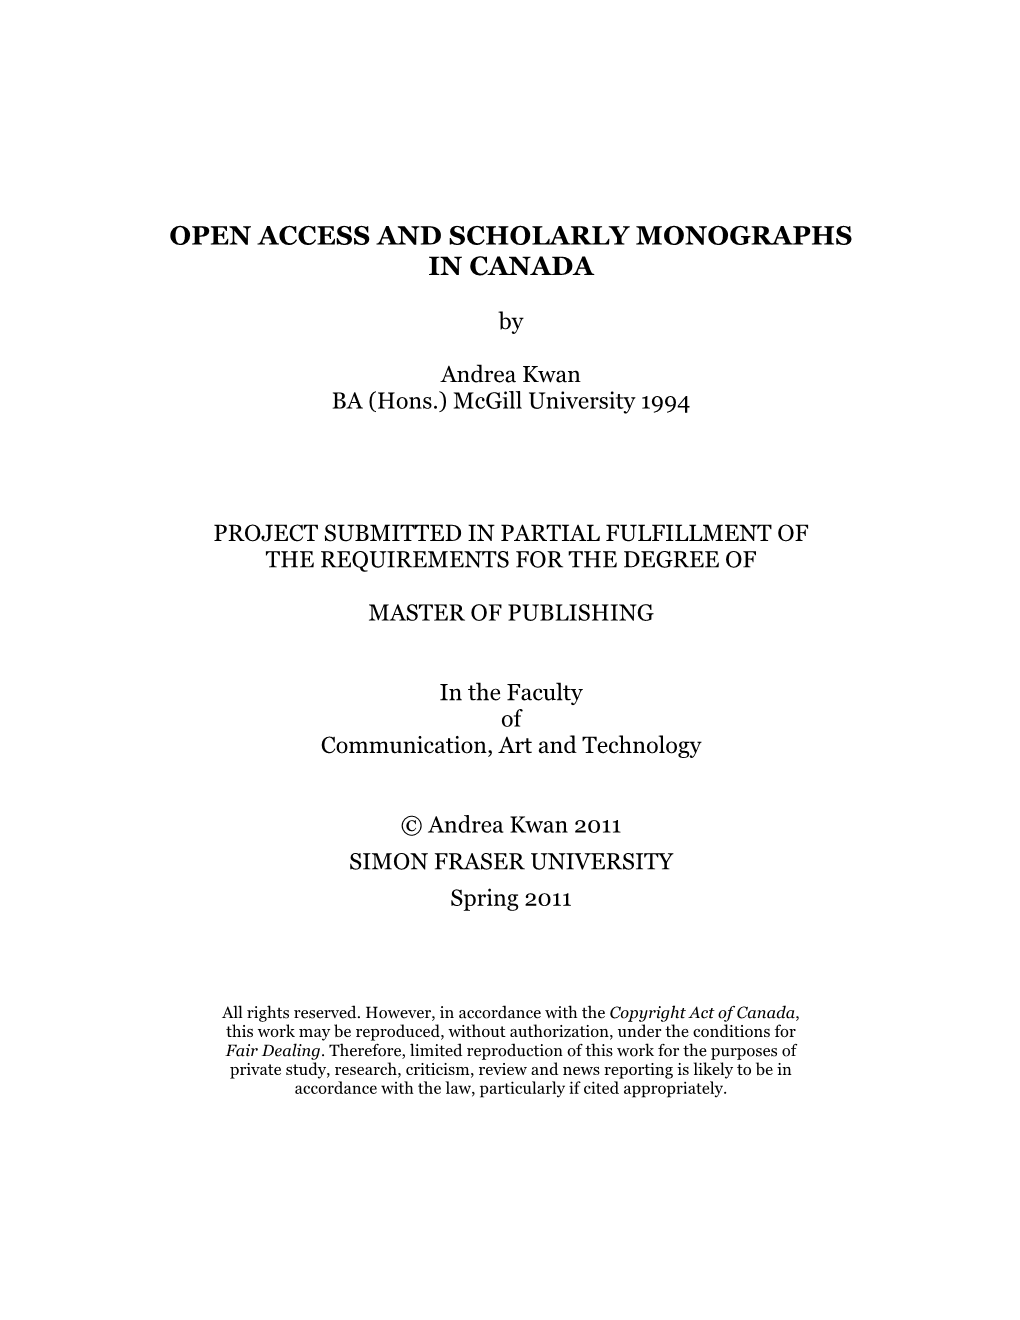 Open Access and Scholarly Monographs in Canada